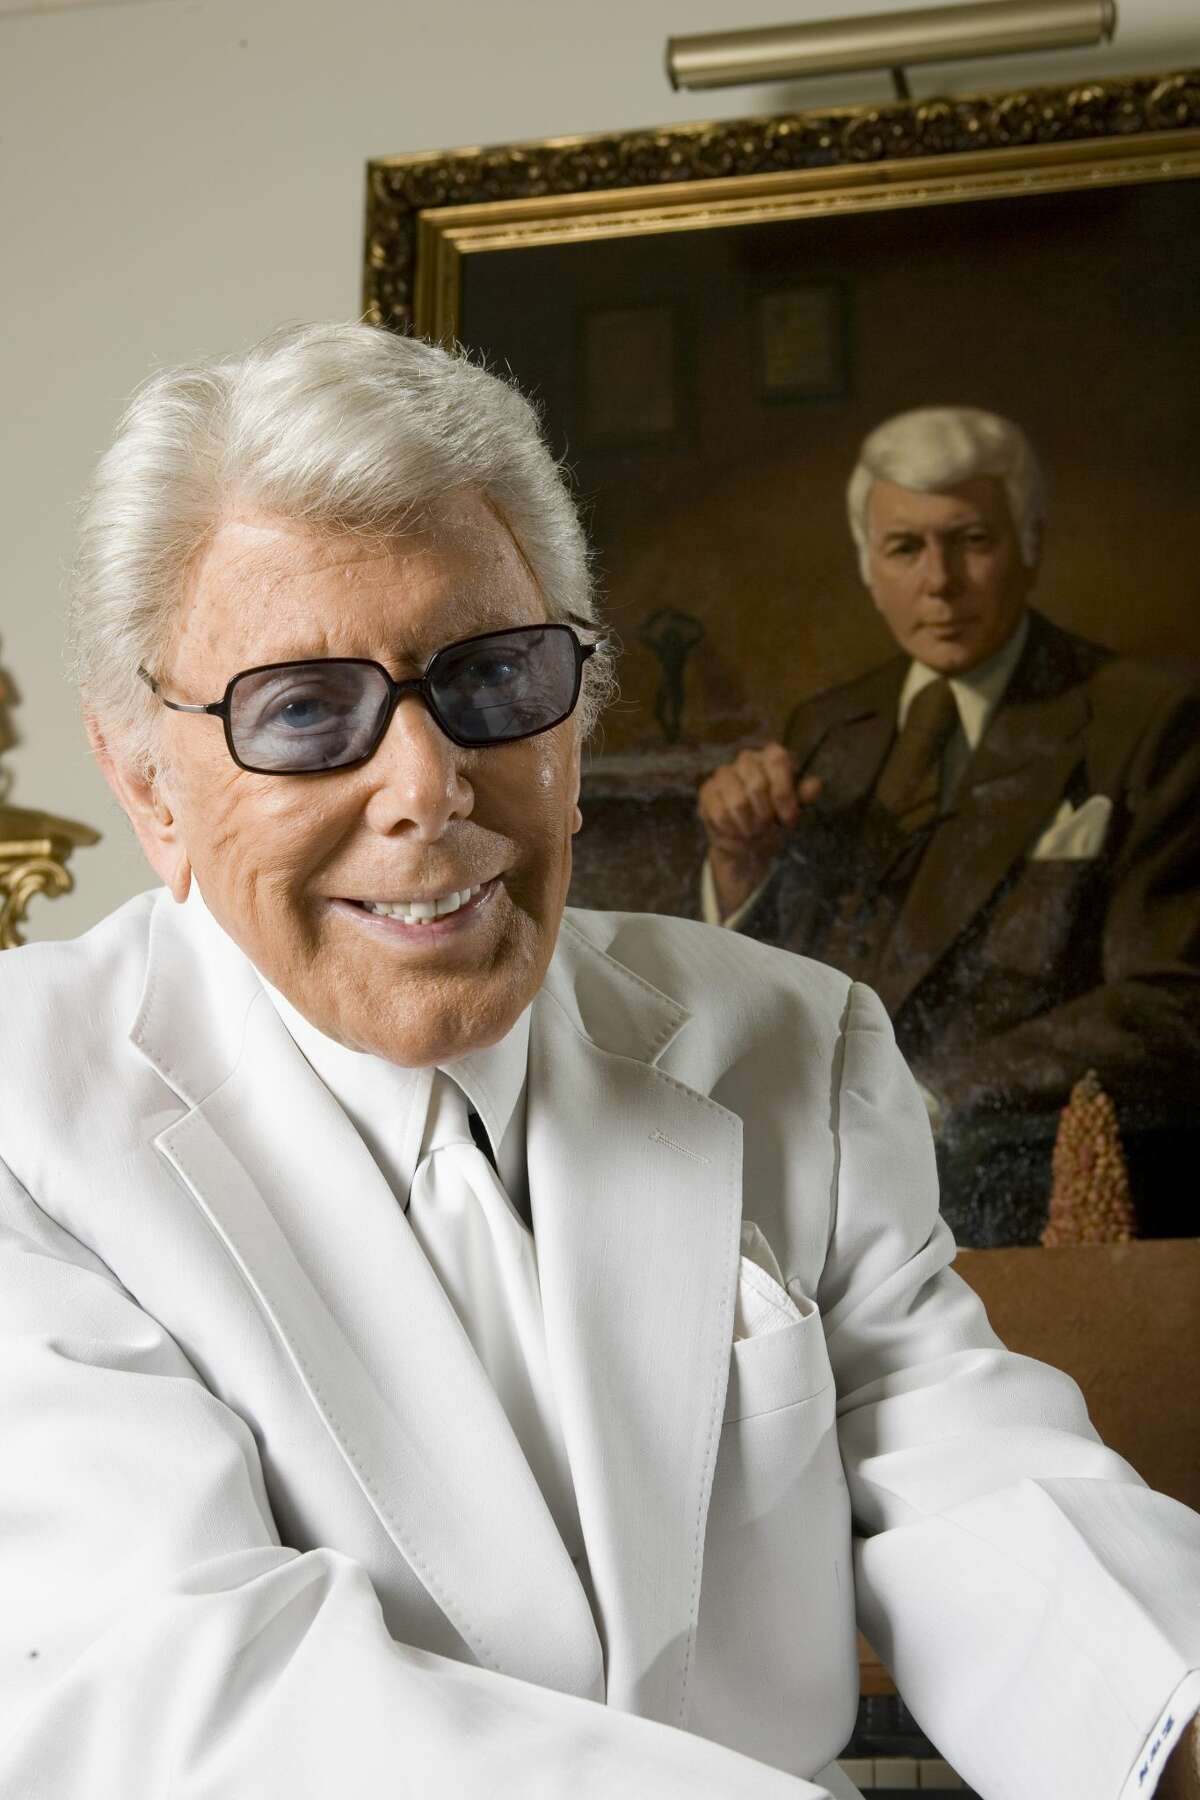 Remembering Houston media icon Marvin Zindler a decade after his passing